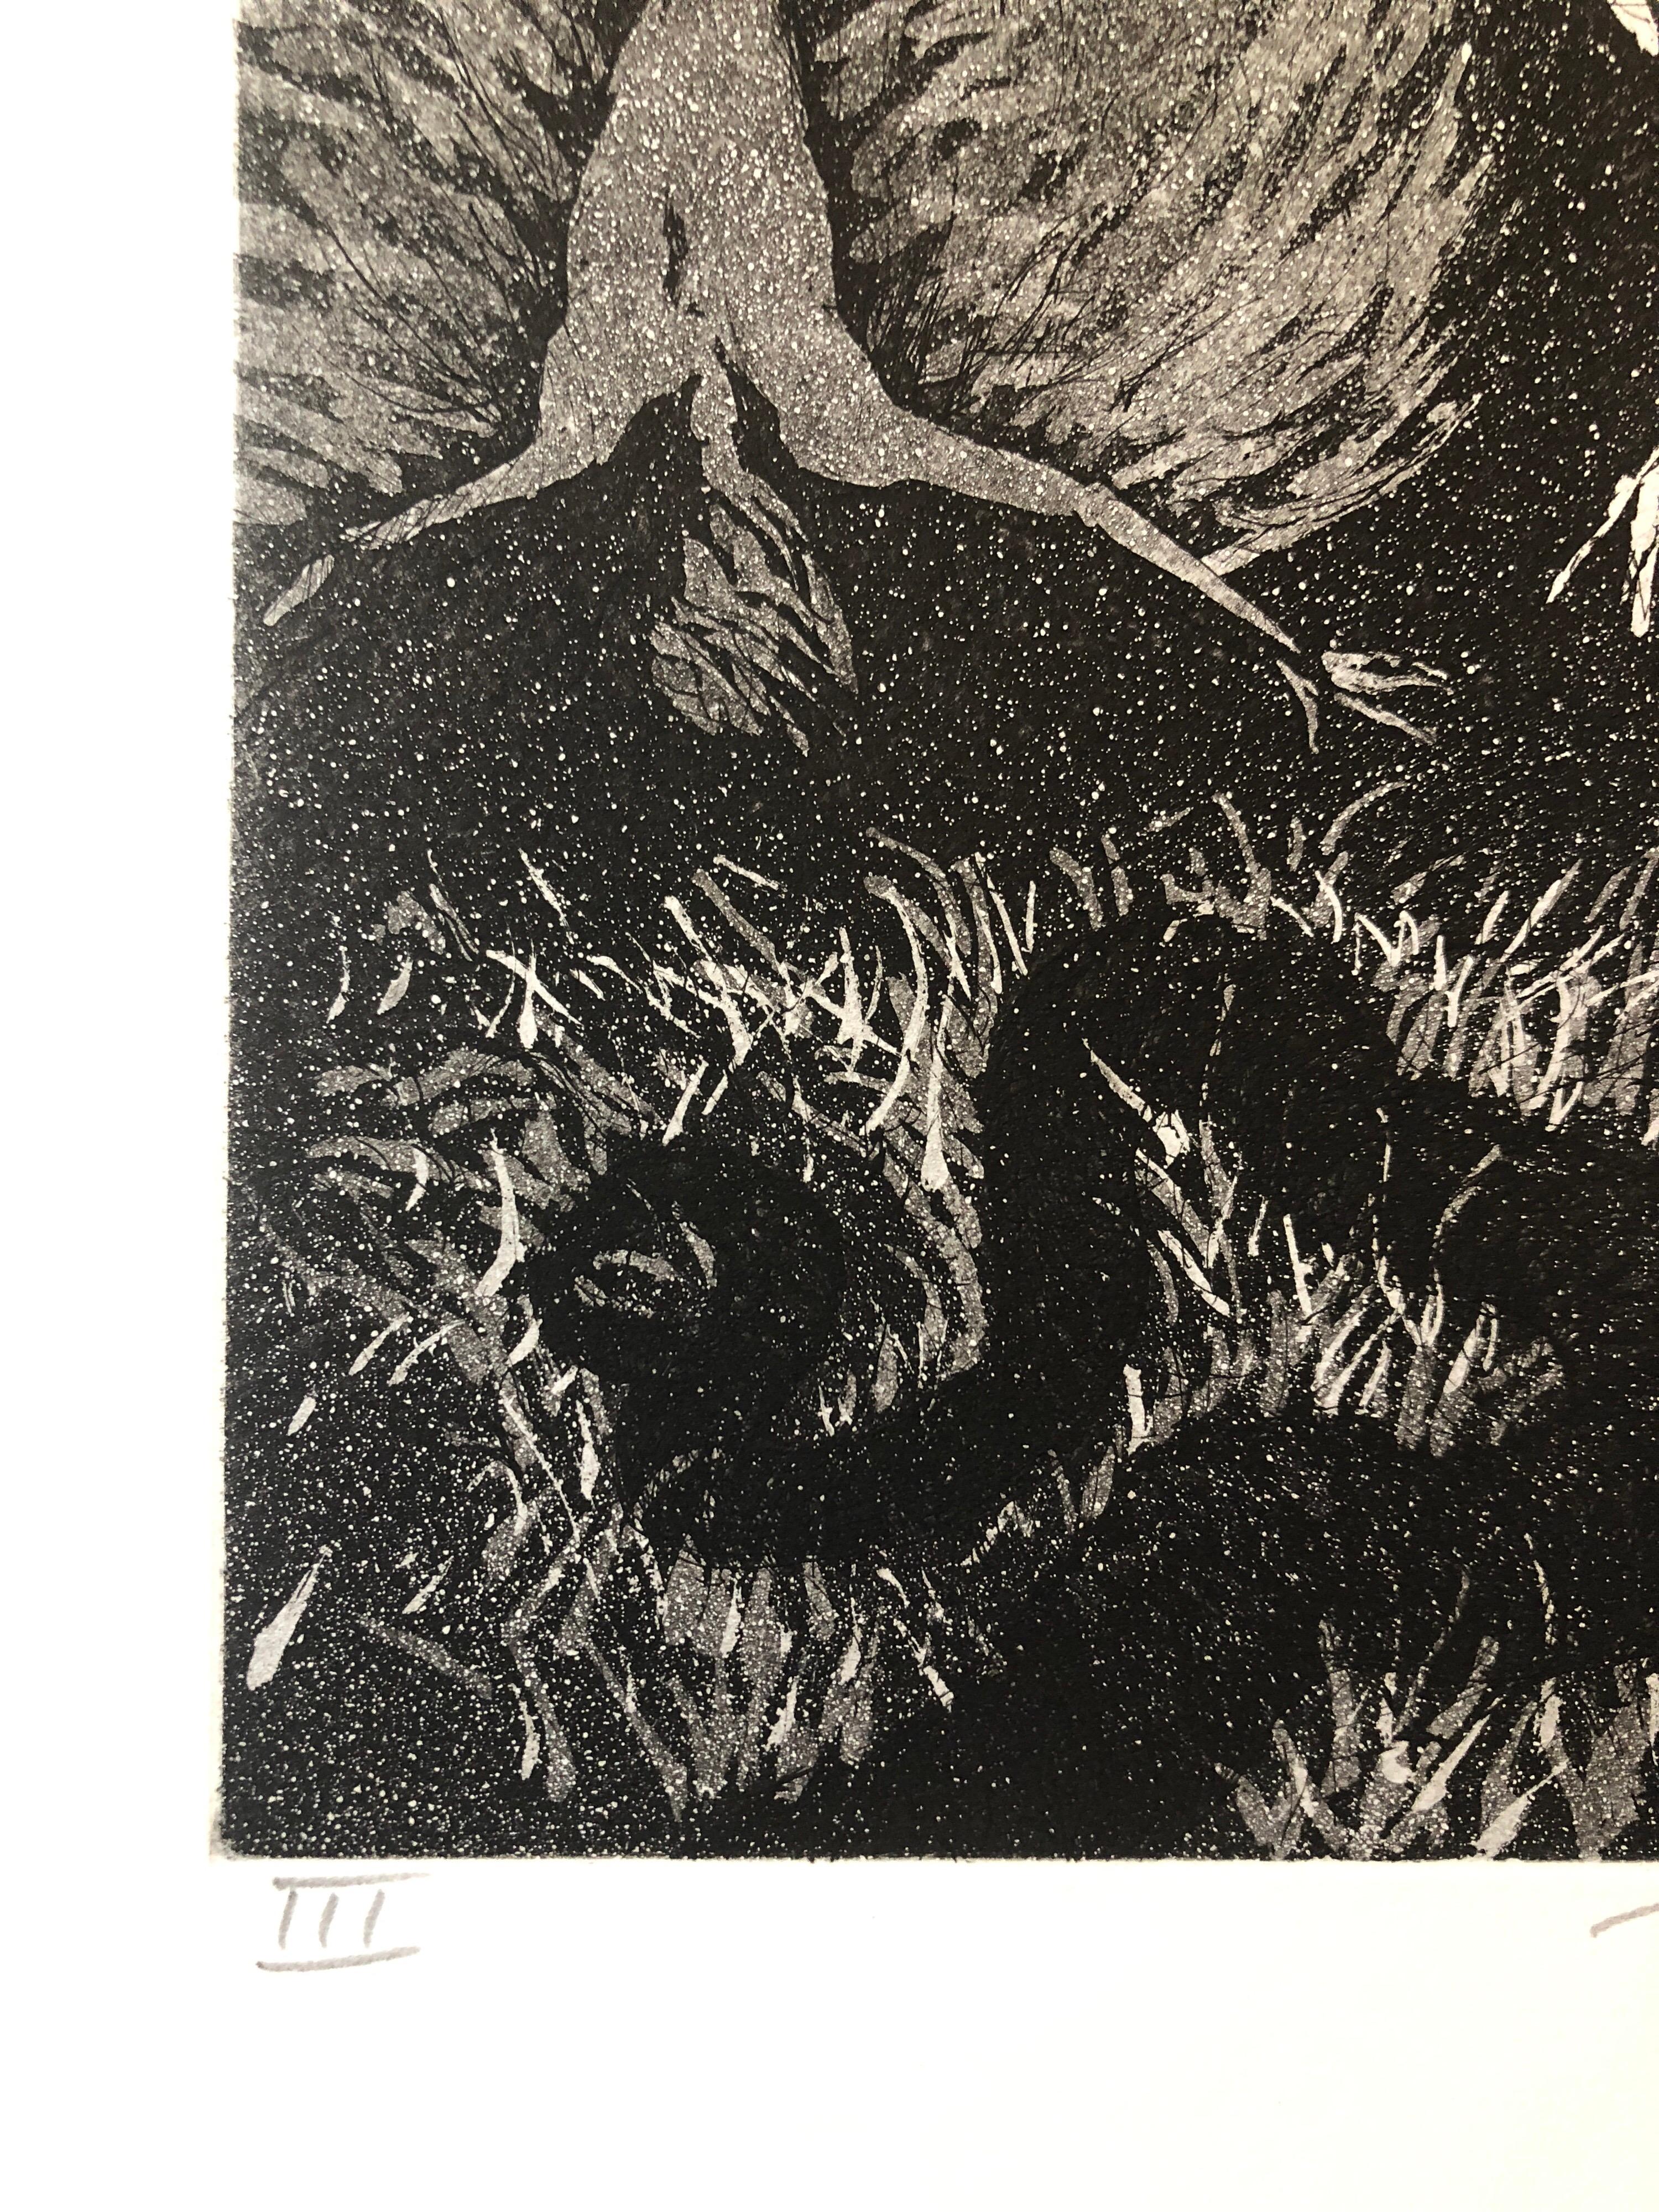 Jack Zajac, American, born 1929
1964 Etching and aquatint hand printed on Fabriano paper, pencil signed and editioned.  
This one depicts winged angels.
Edition Roman Numeral III
Image: 12 9/16 x 8 5/8 in. (31.9 x 21.9 cm)
Sheet: 20 x 14 in. (50.8 x